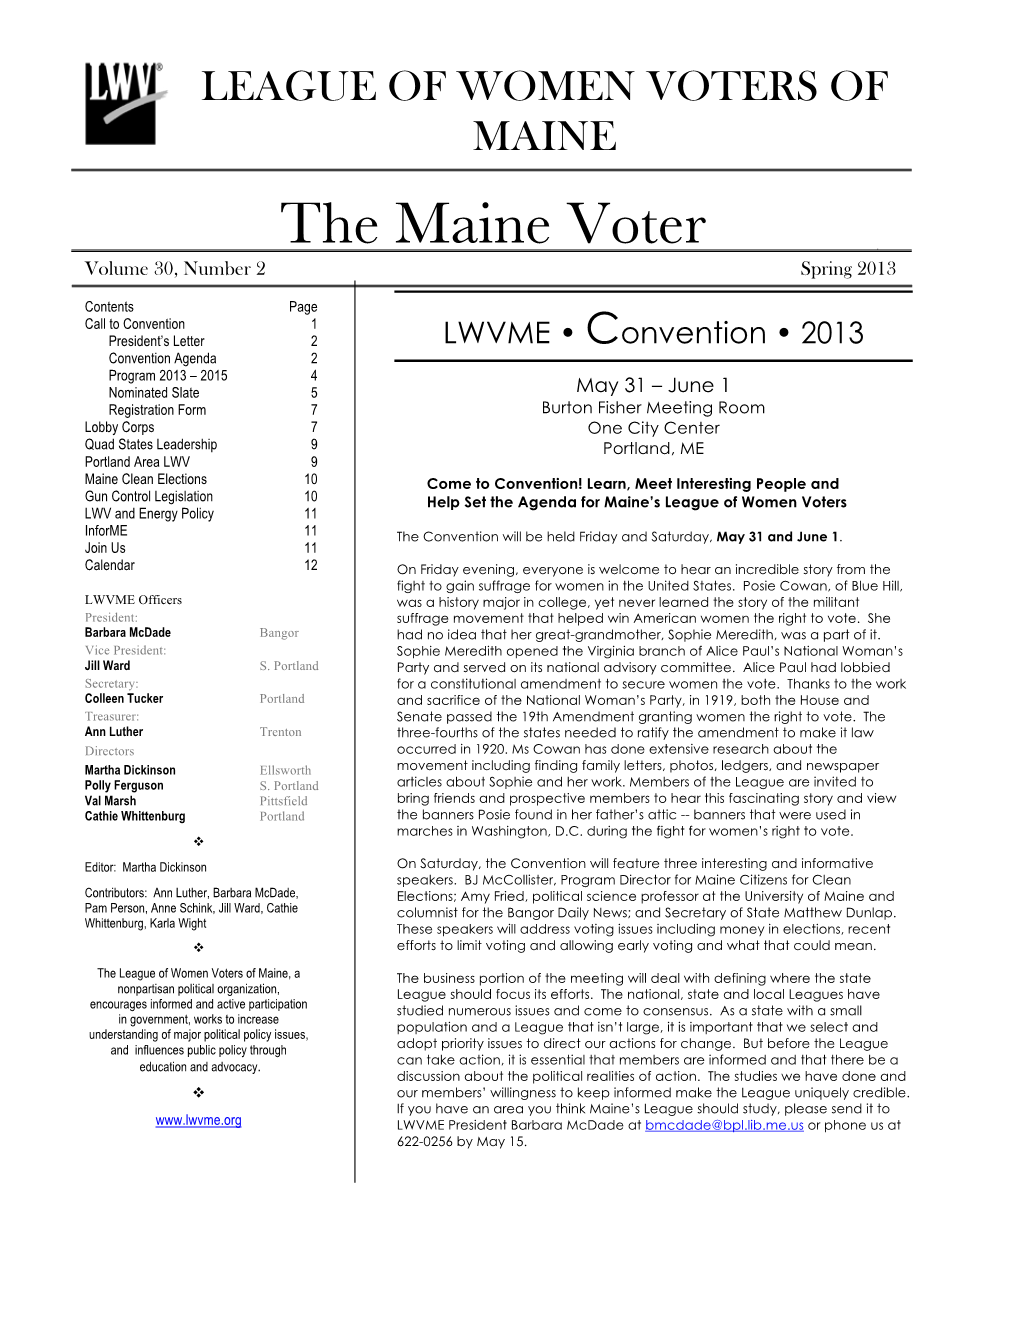 The Maine Voter Volume 30, Number 2 Spring 2013